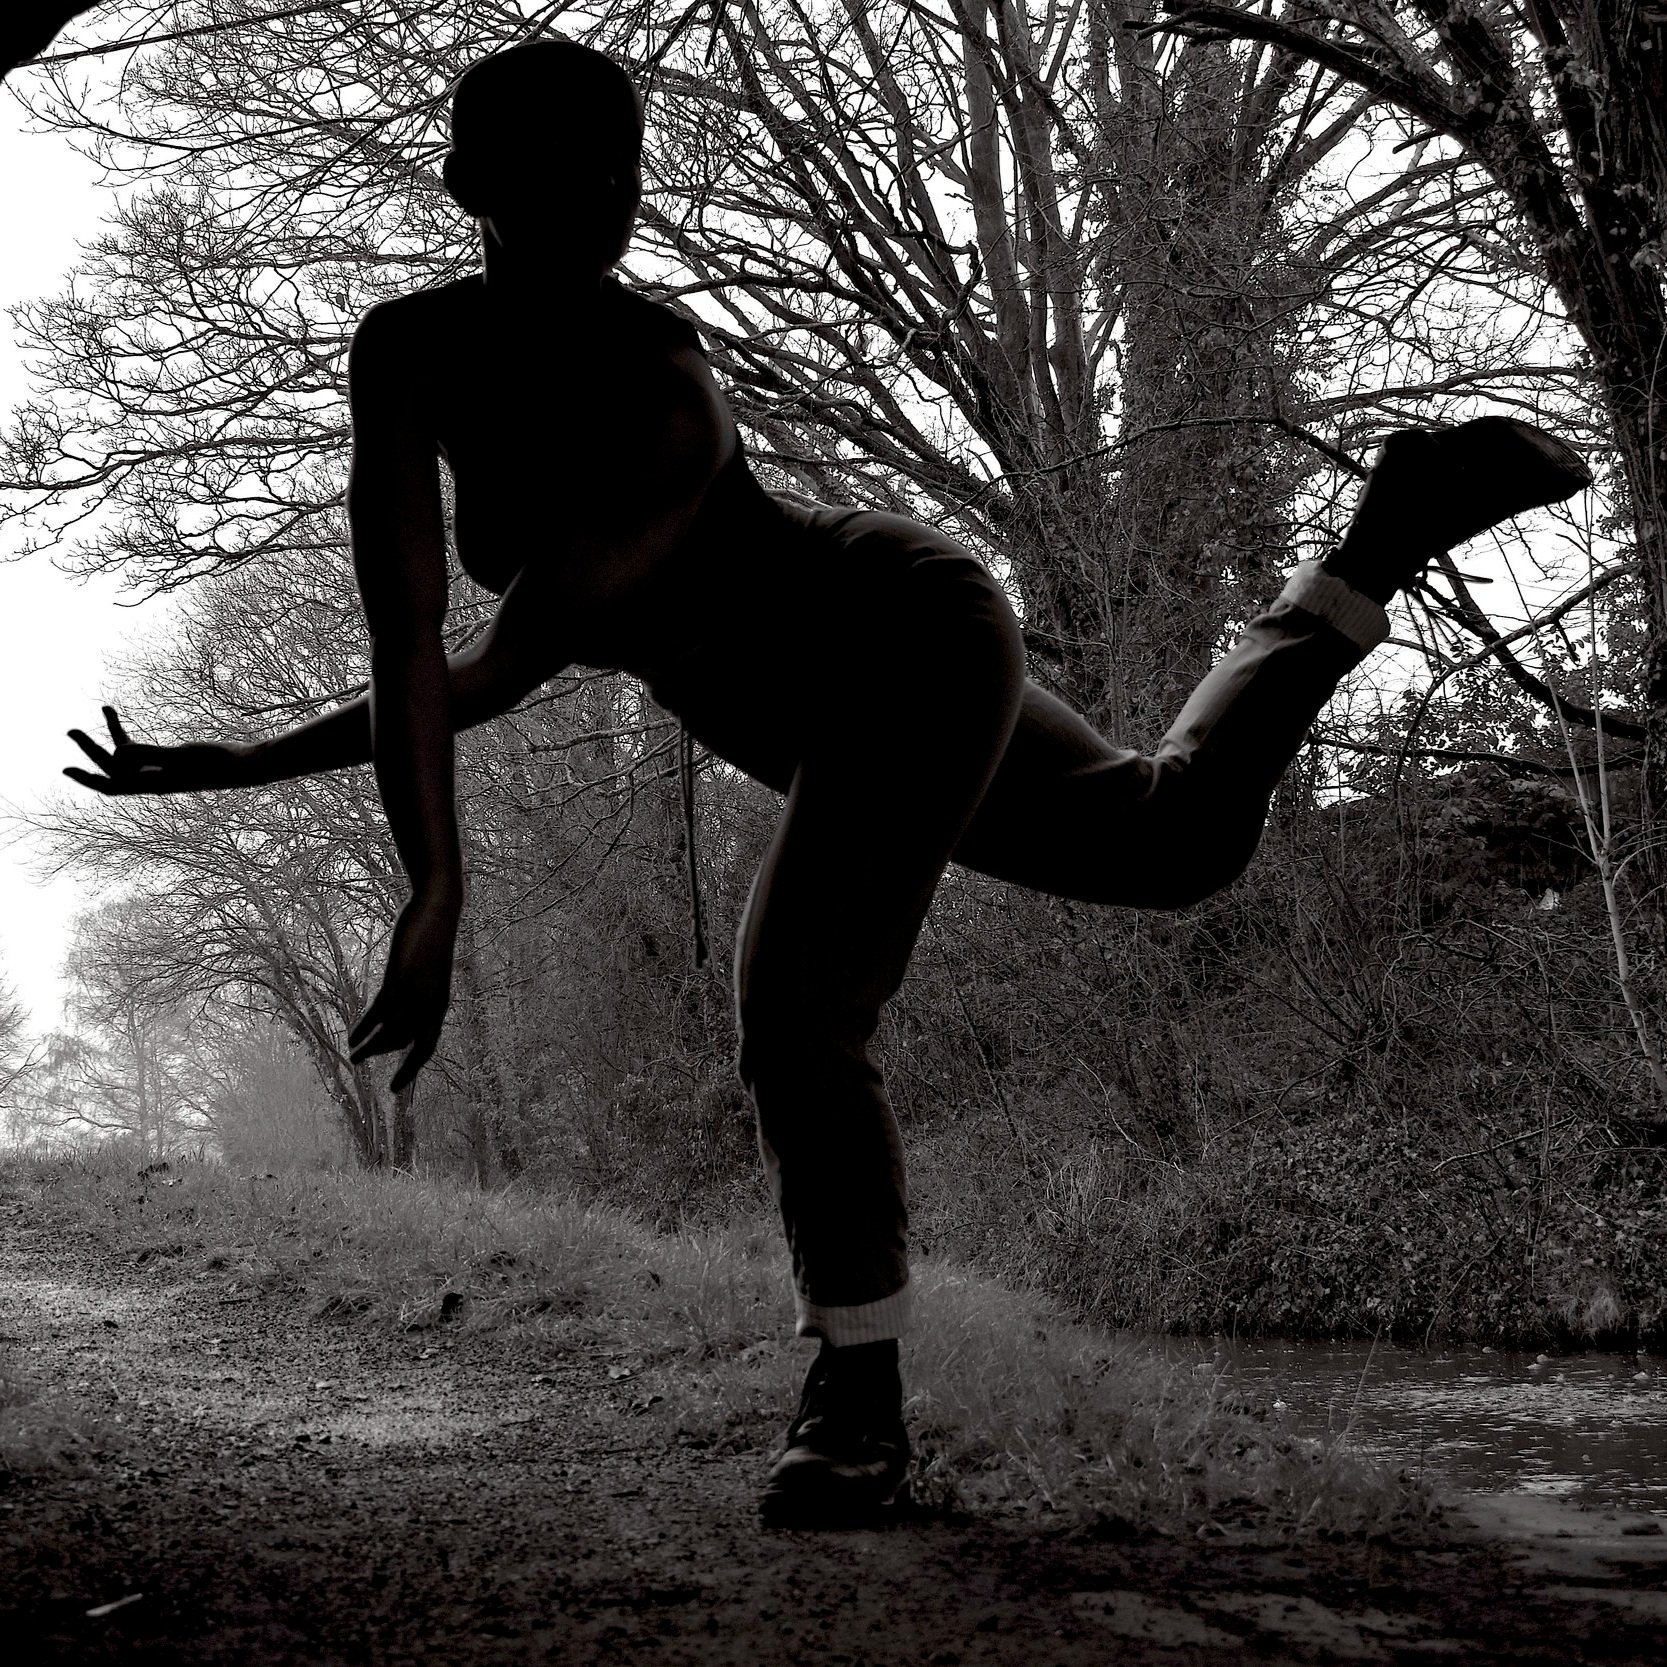  The image is black and white and shows a female dancer outdoors in a rural nature setting. She is mainly depicted as a silhouette. Balancing on leg she has the other leg up and behind her, it is bent. Her upper body is leaning forwards with arms low